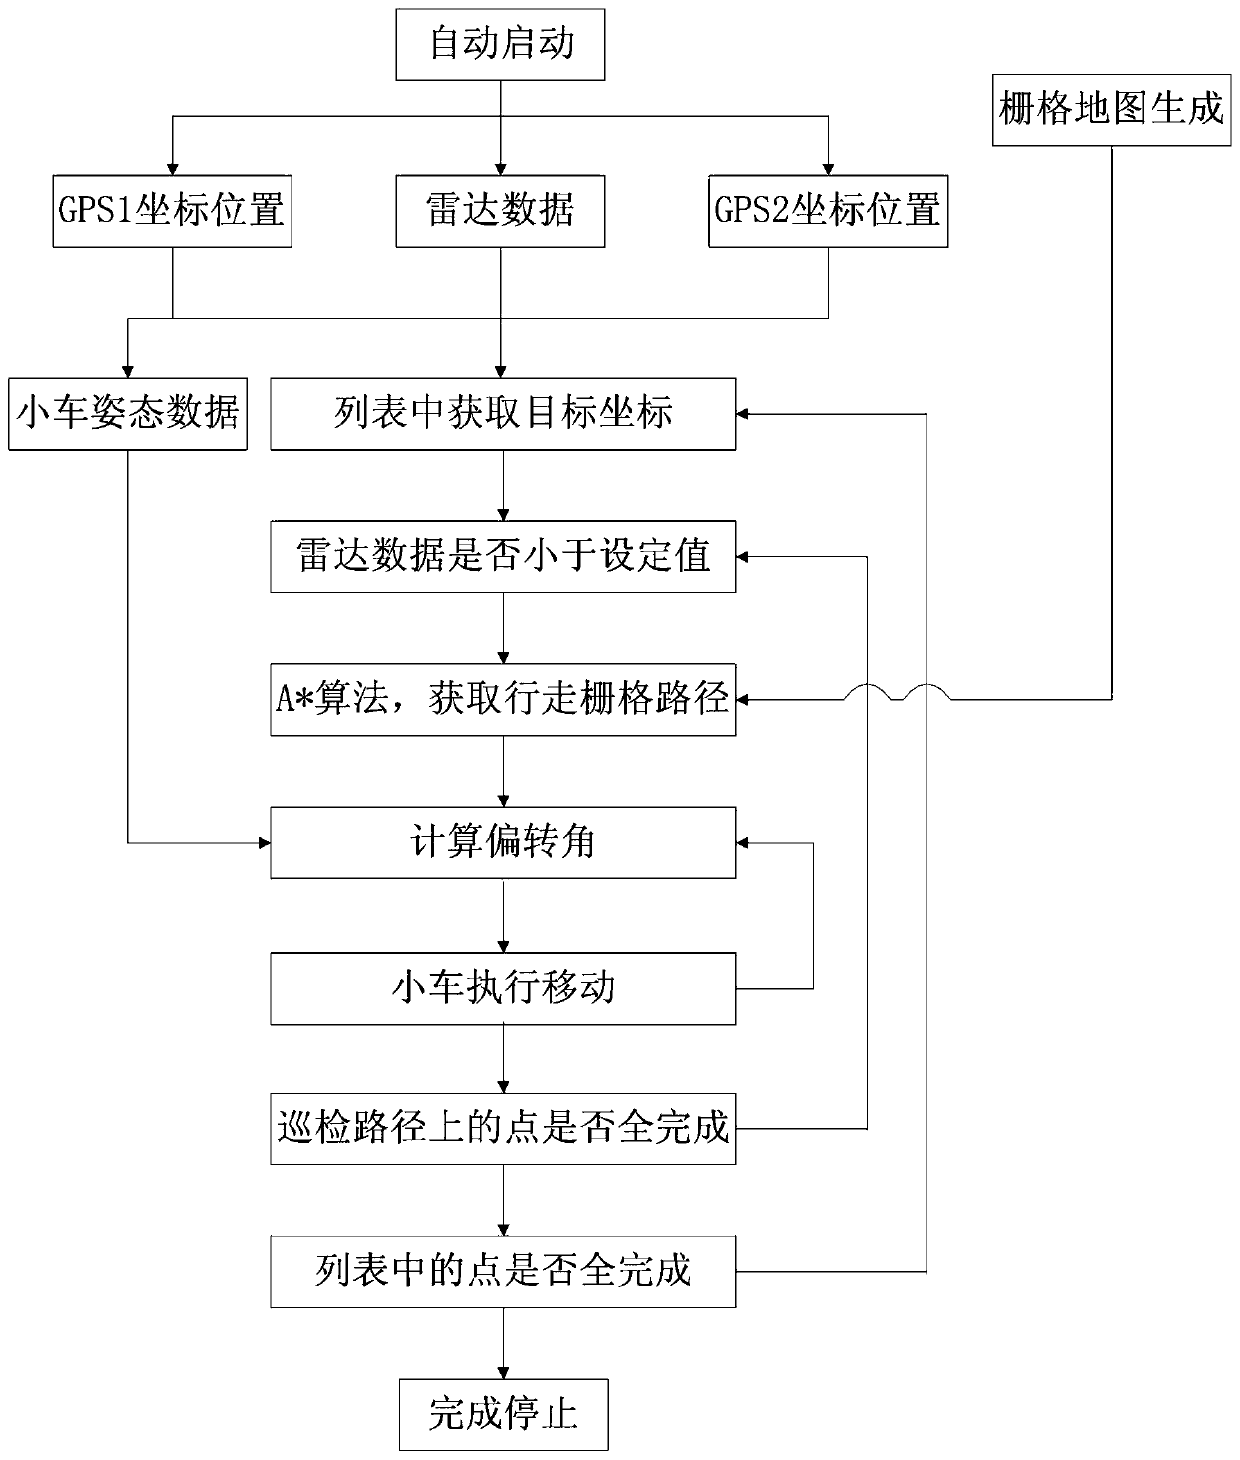 Equipment inspection method in area and inspection equipment